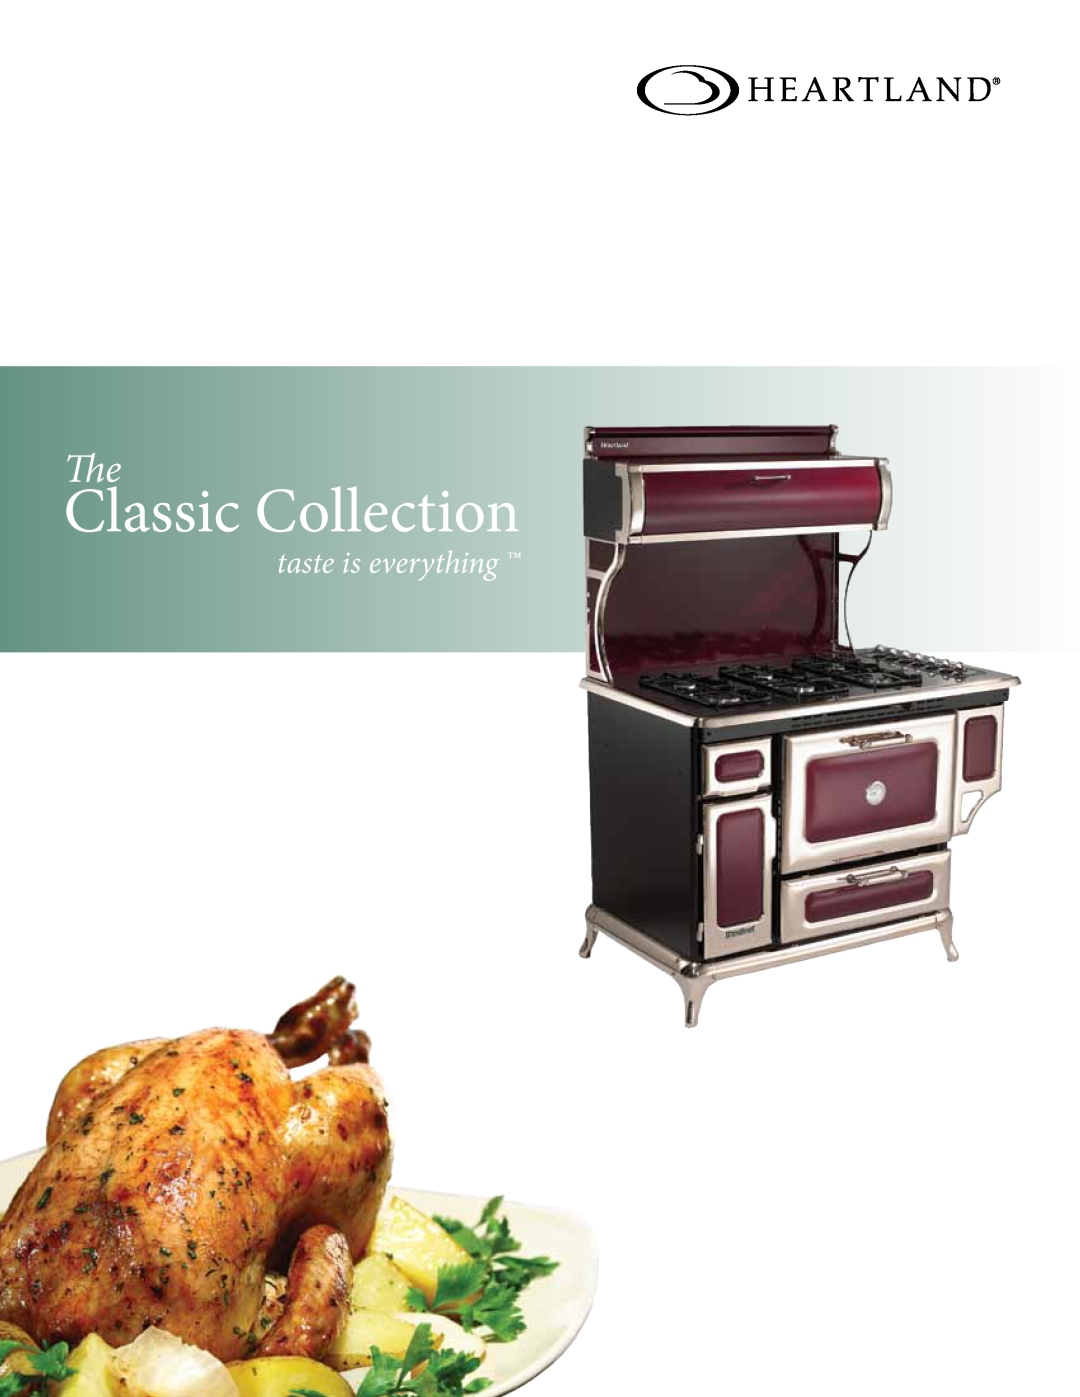 Heartland HCFDR20-WHT, HCBMR19L-WHT manual Classic Collection, taste is everything 